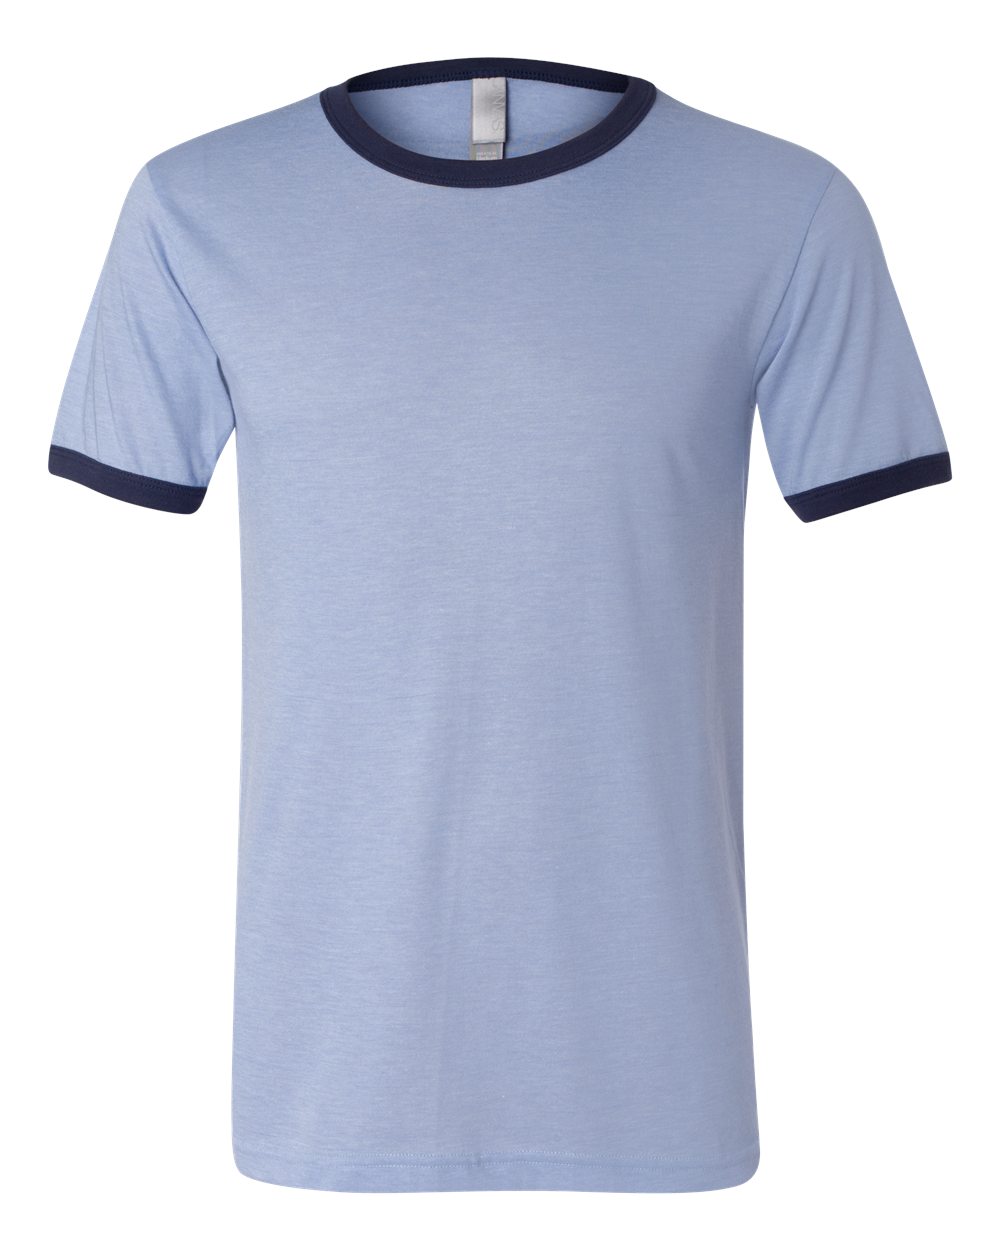 click to view heather blue/navy